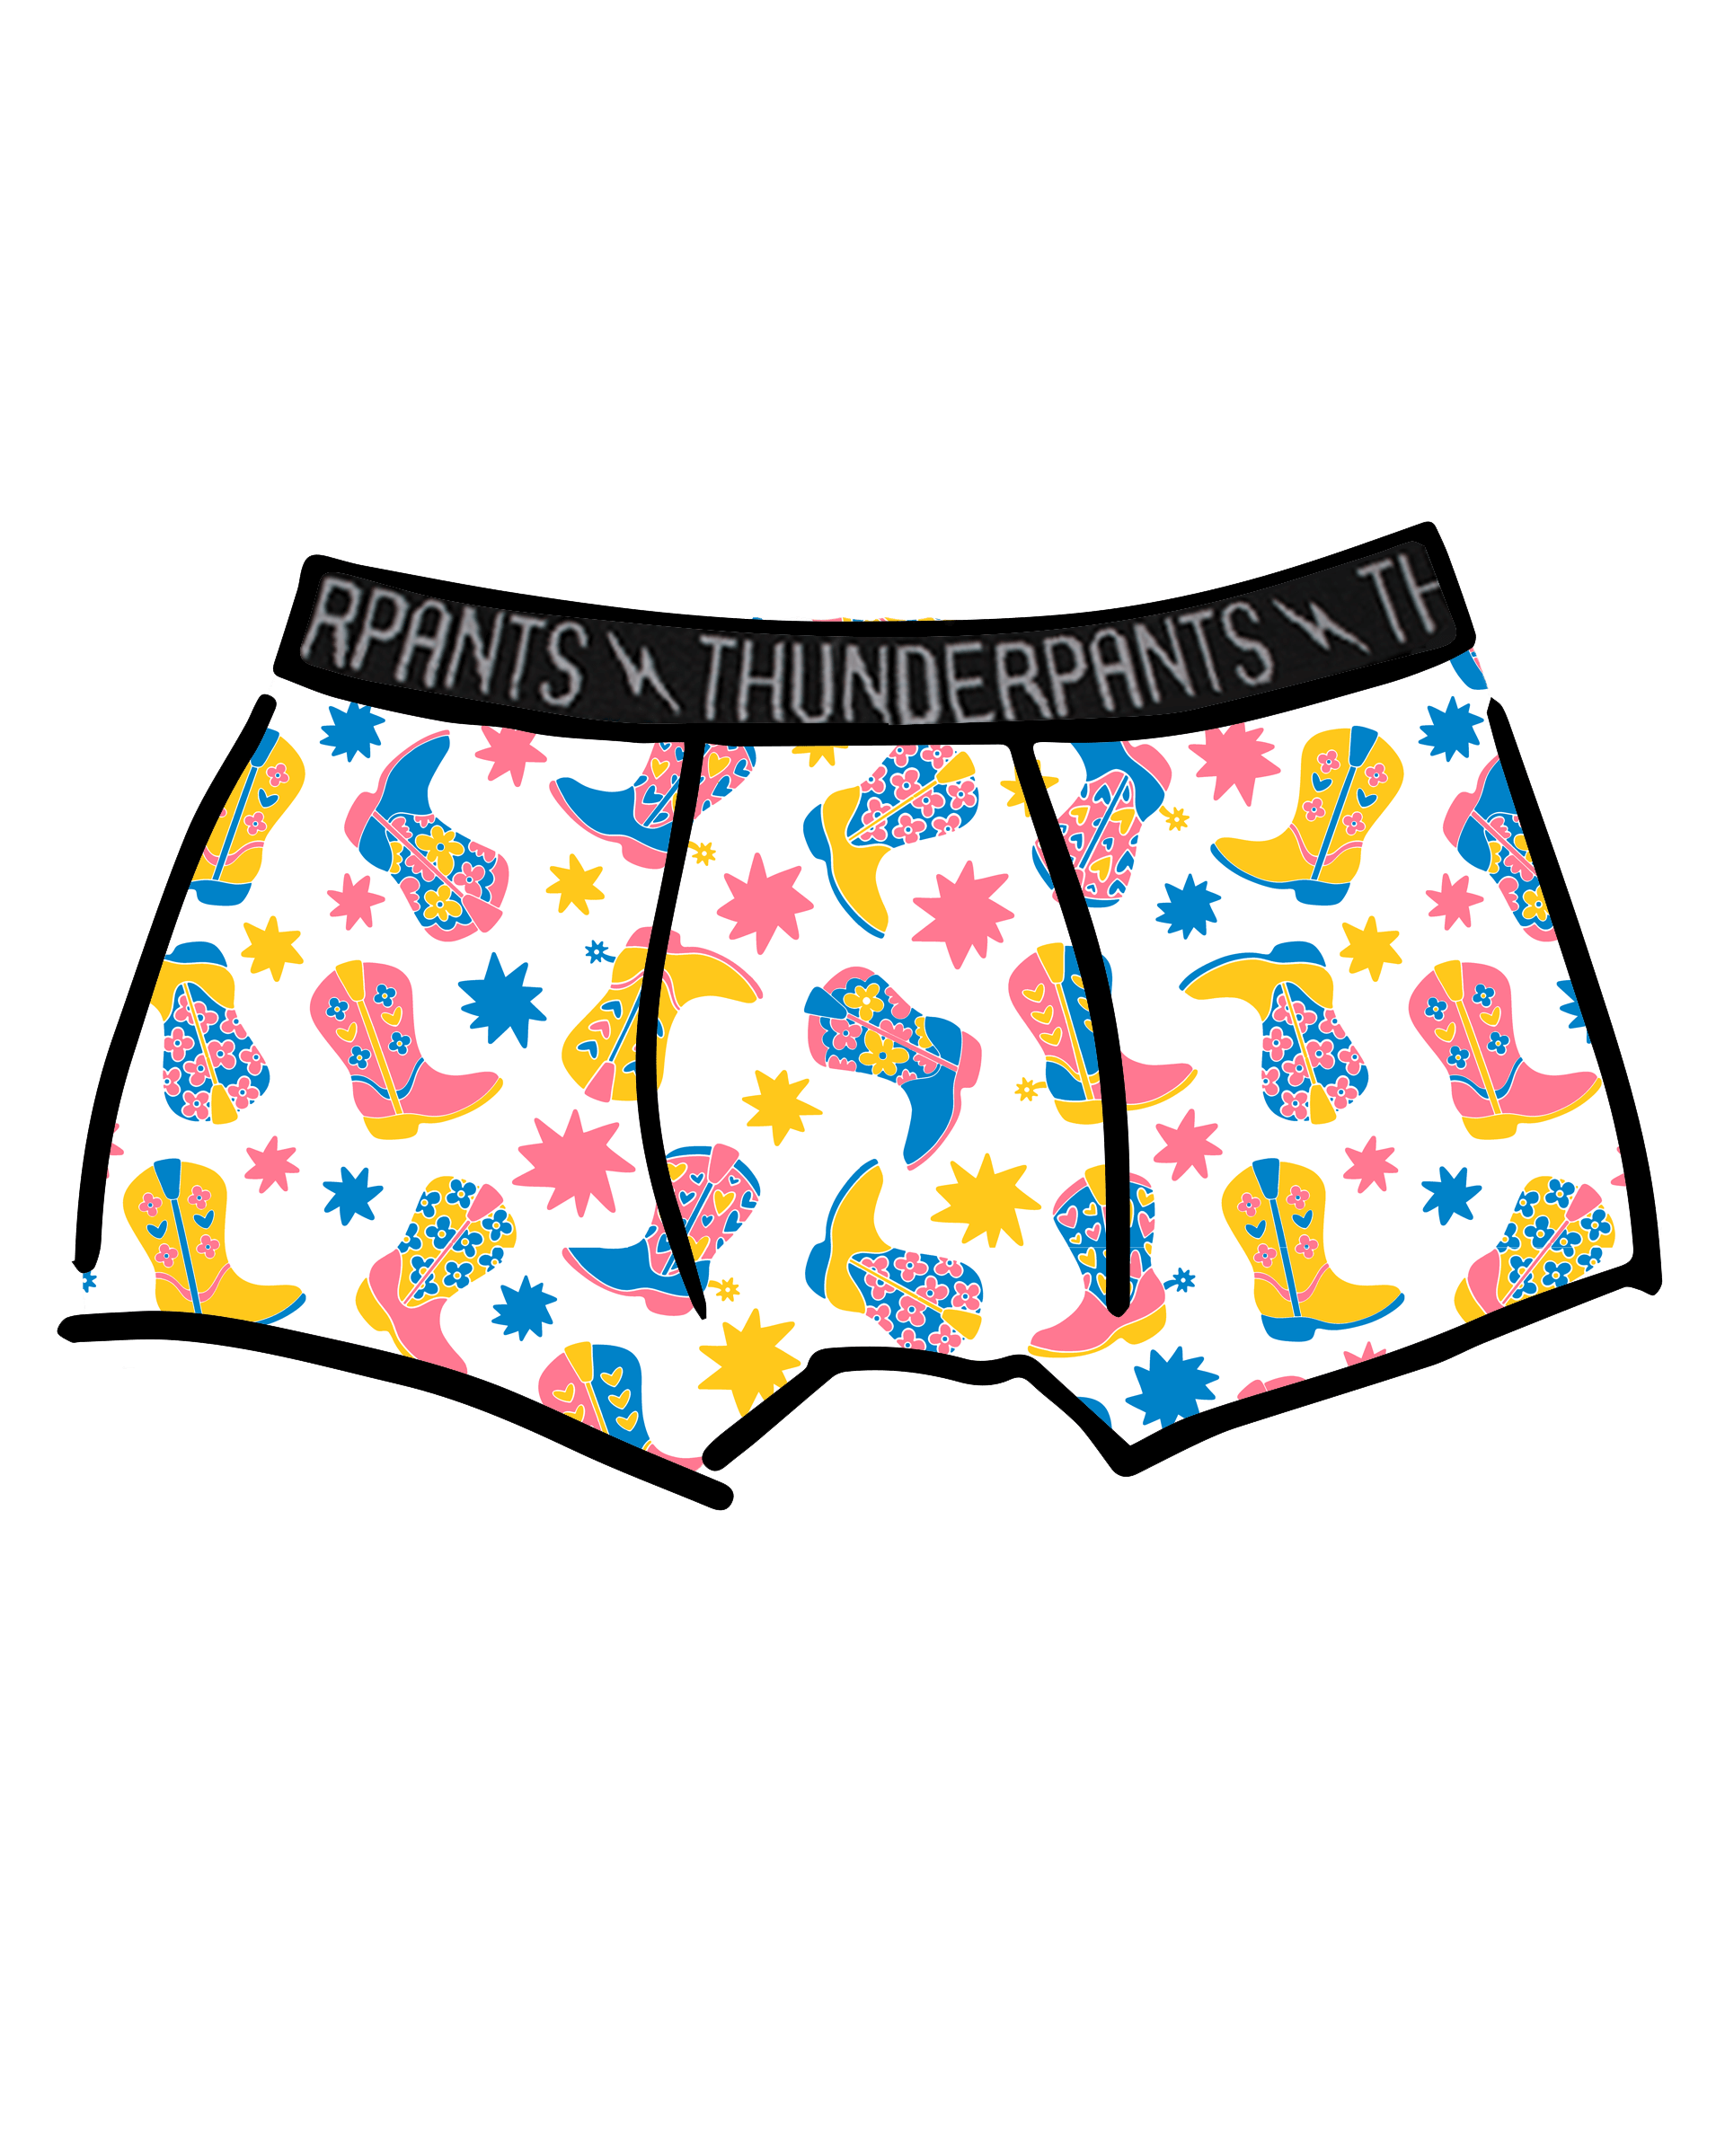 Drawing of Thunderpants Boxer Brief style underwear in Boot Scootin' print.